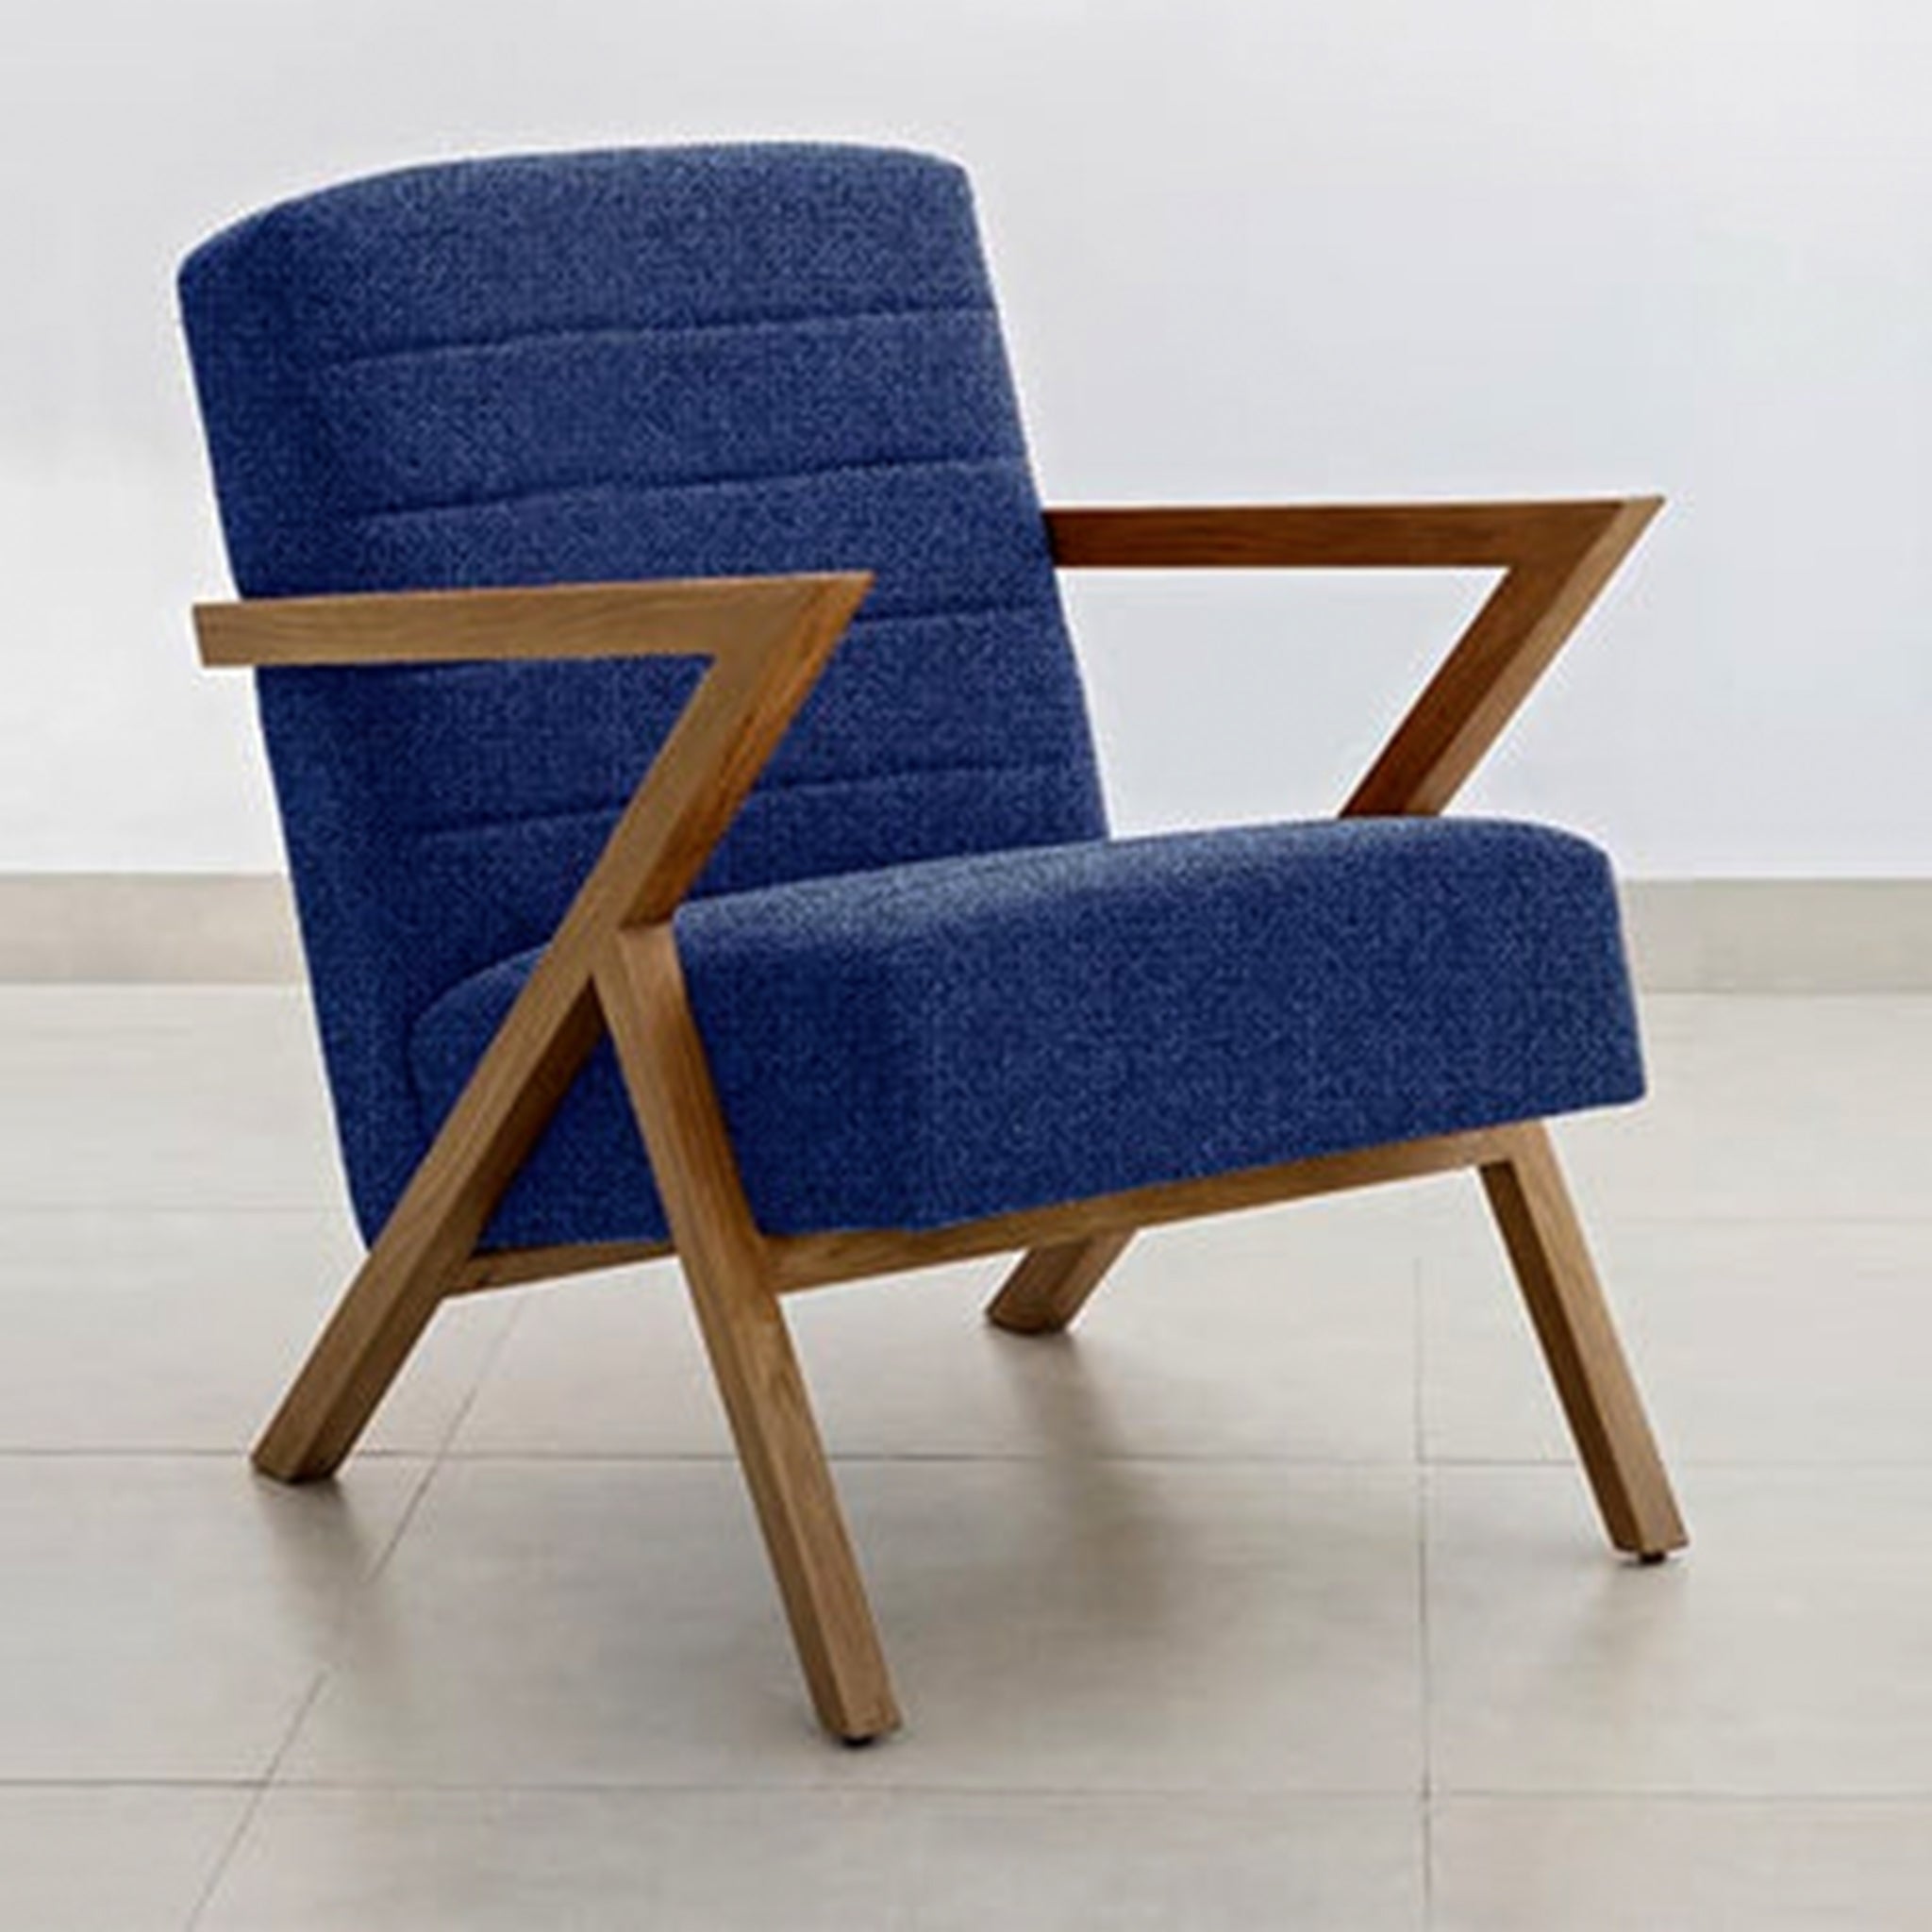 The Stanley Accent Chair with mid-century modern design